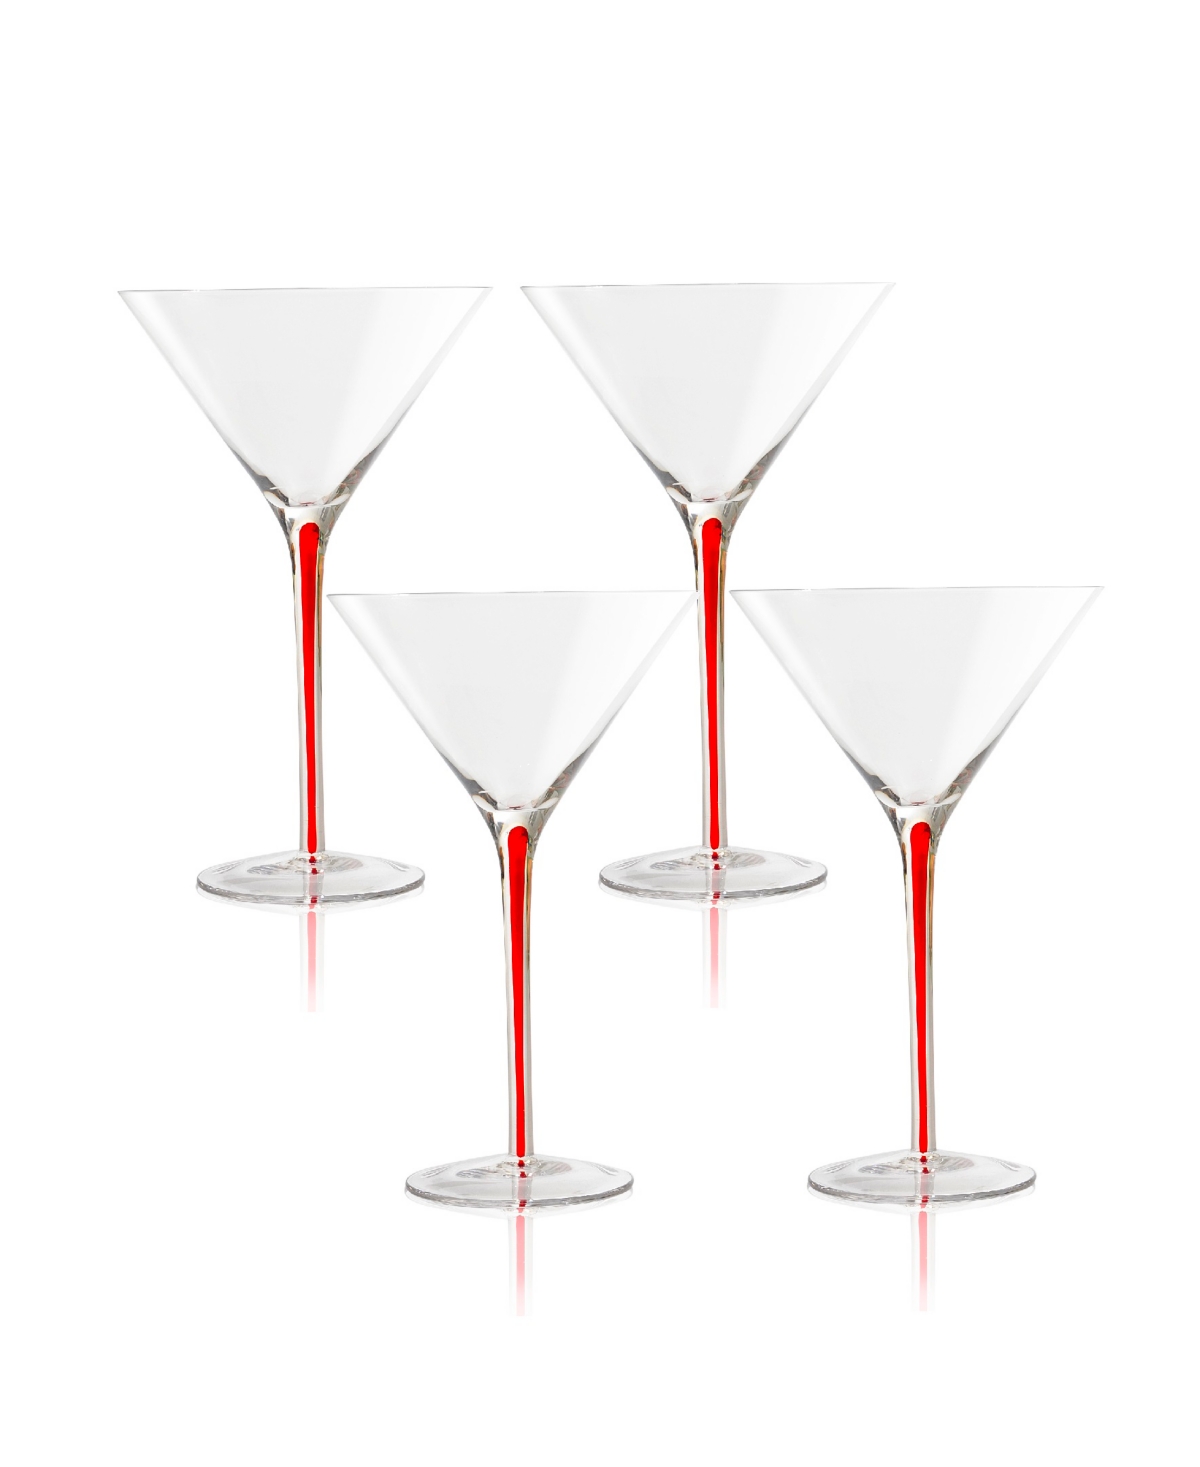 Qualia Glass Tempest Martini Glasses, Set Of 4 In Clear,red